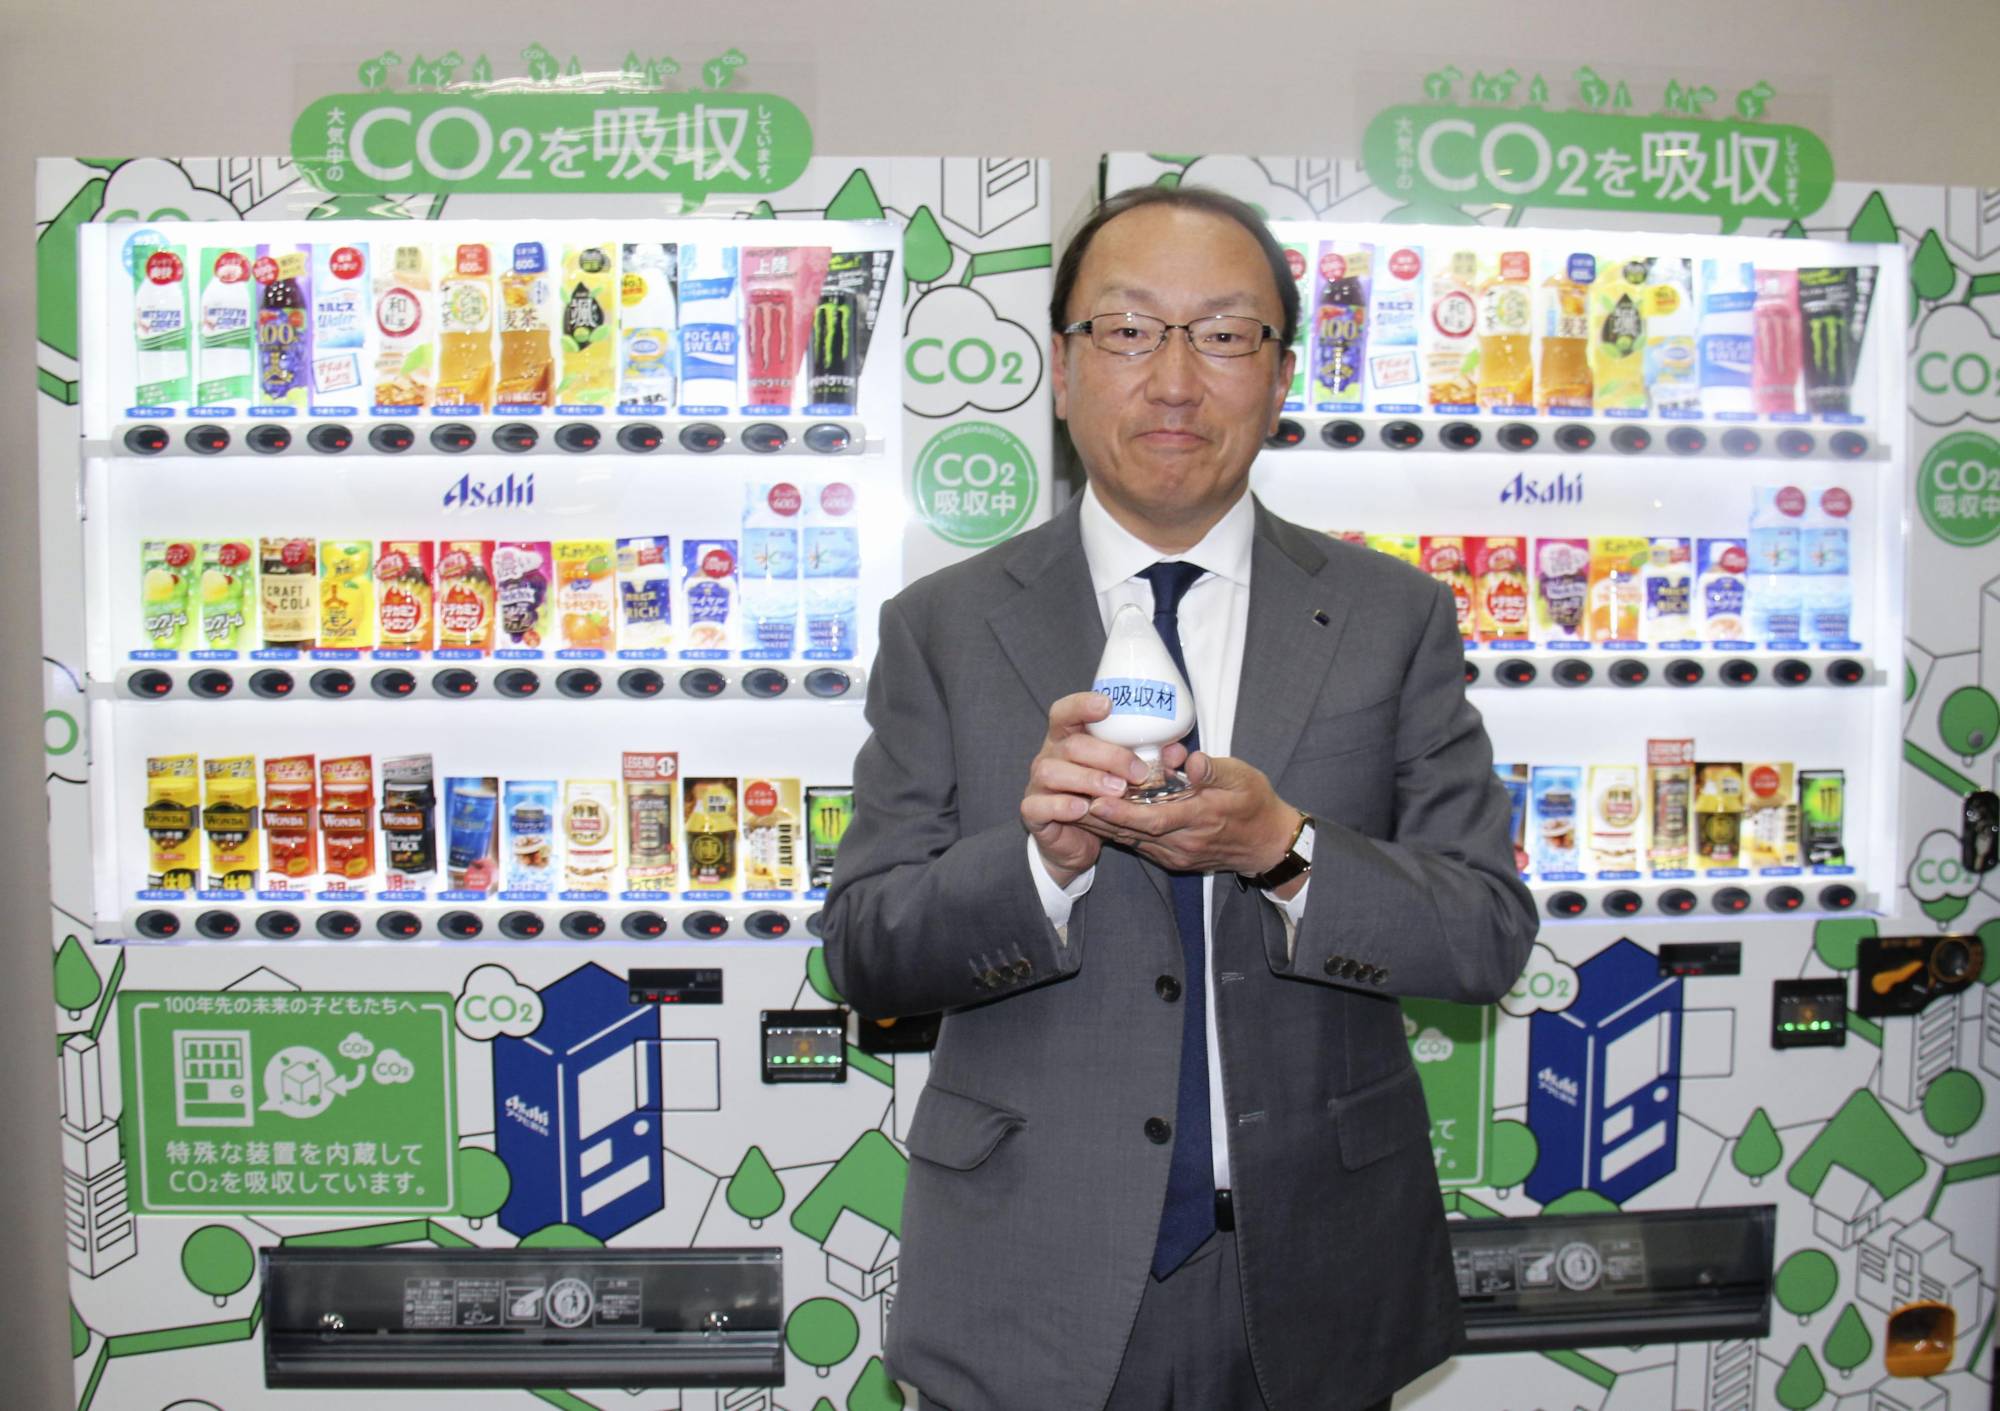 Forest' of carbon dioxide-sucking vending machines planned in Japan - The  Japan Times